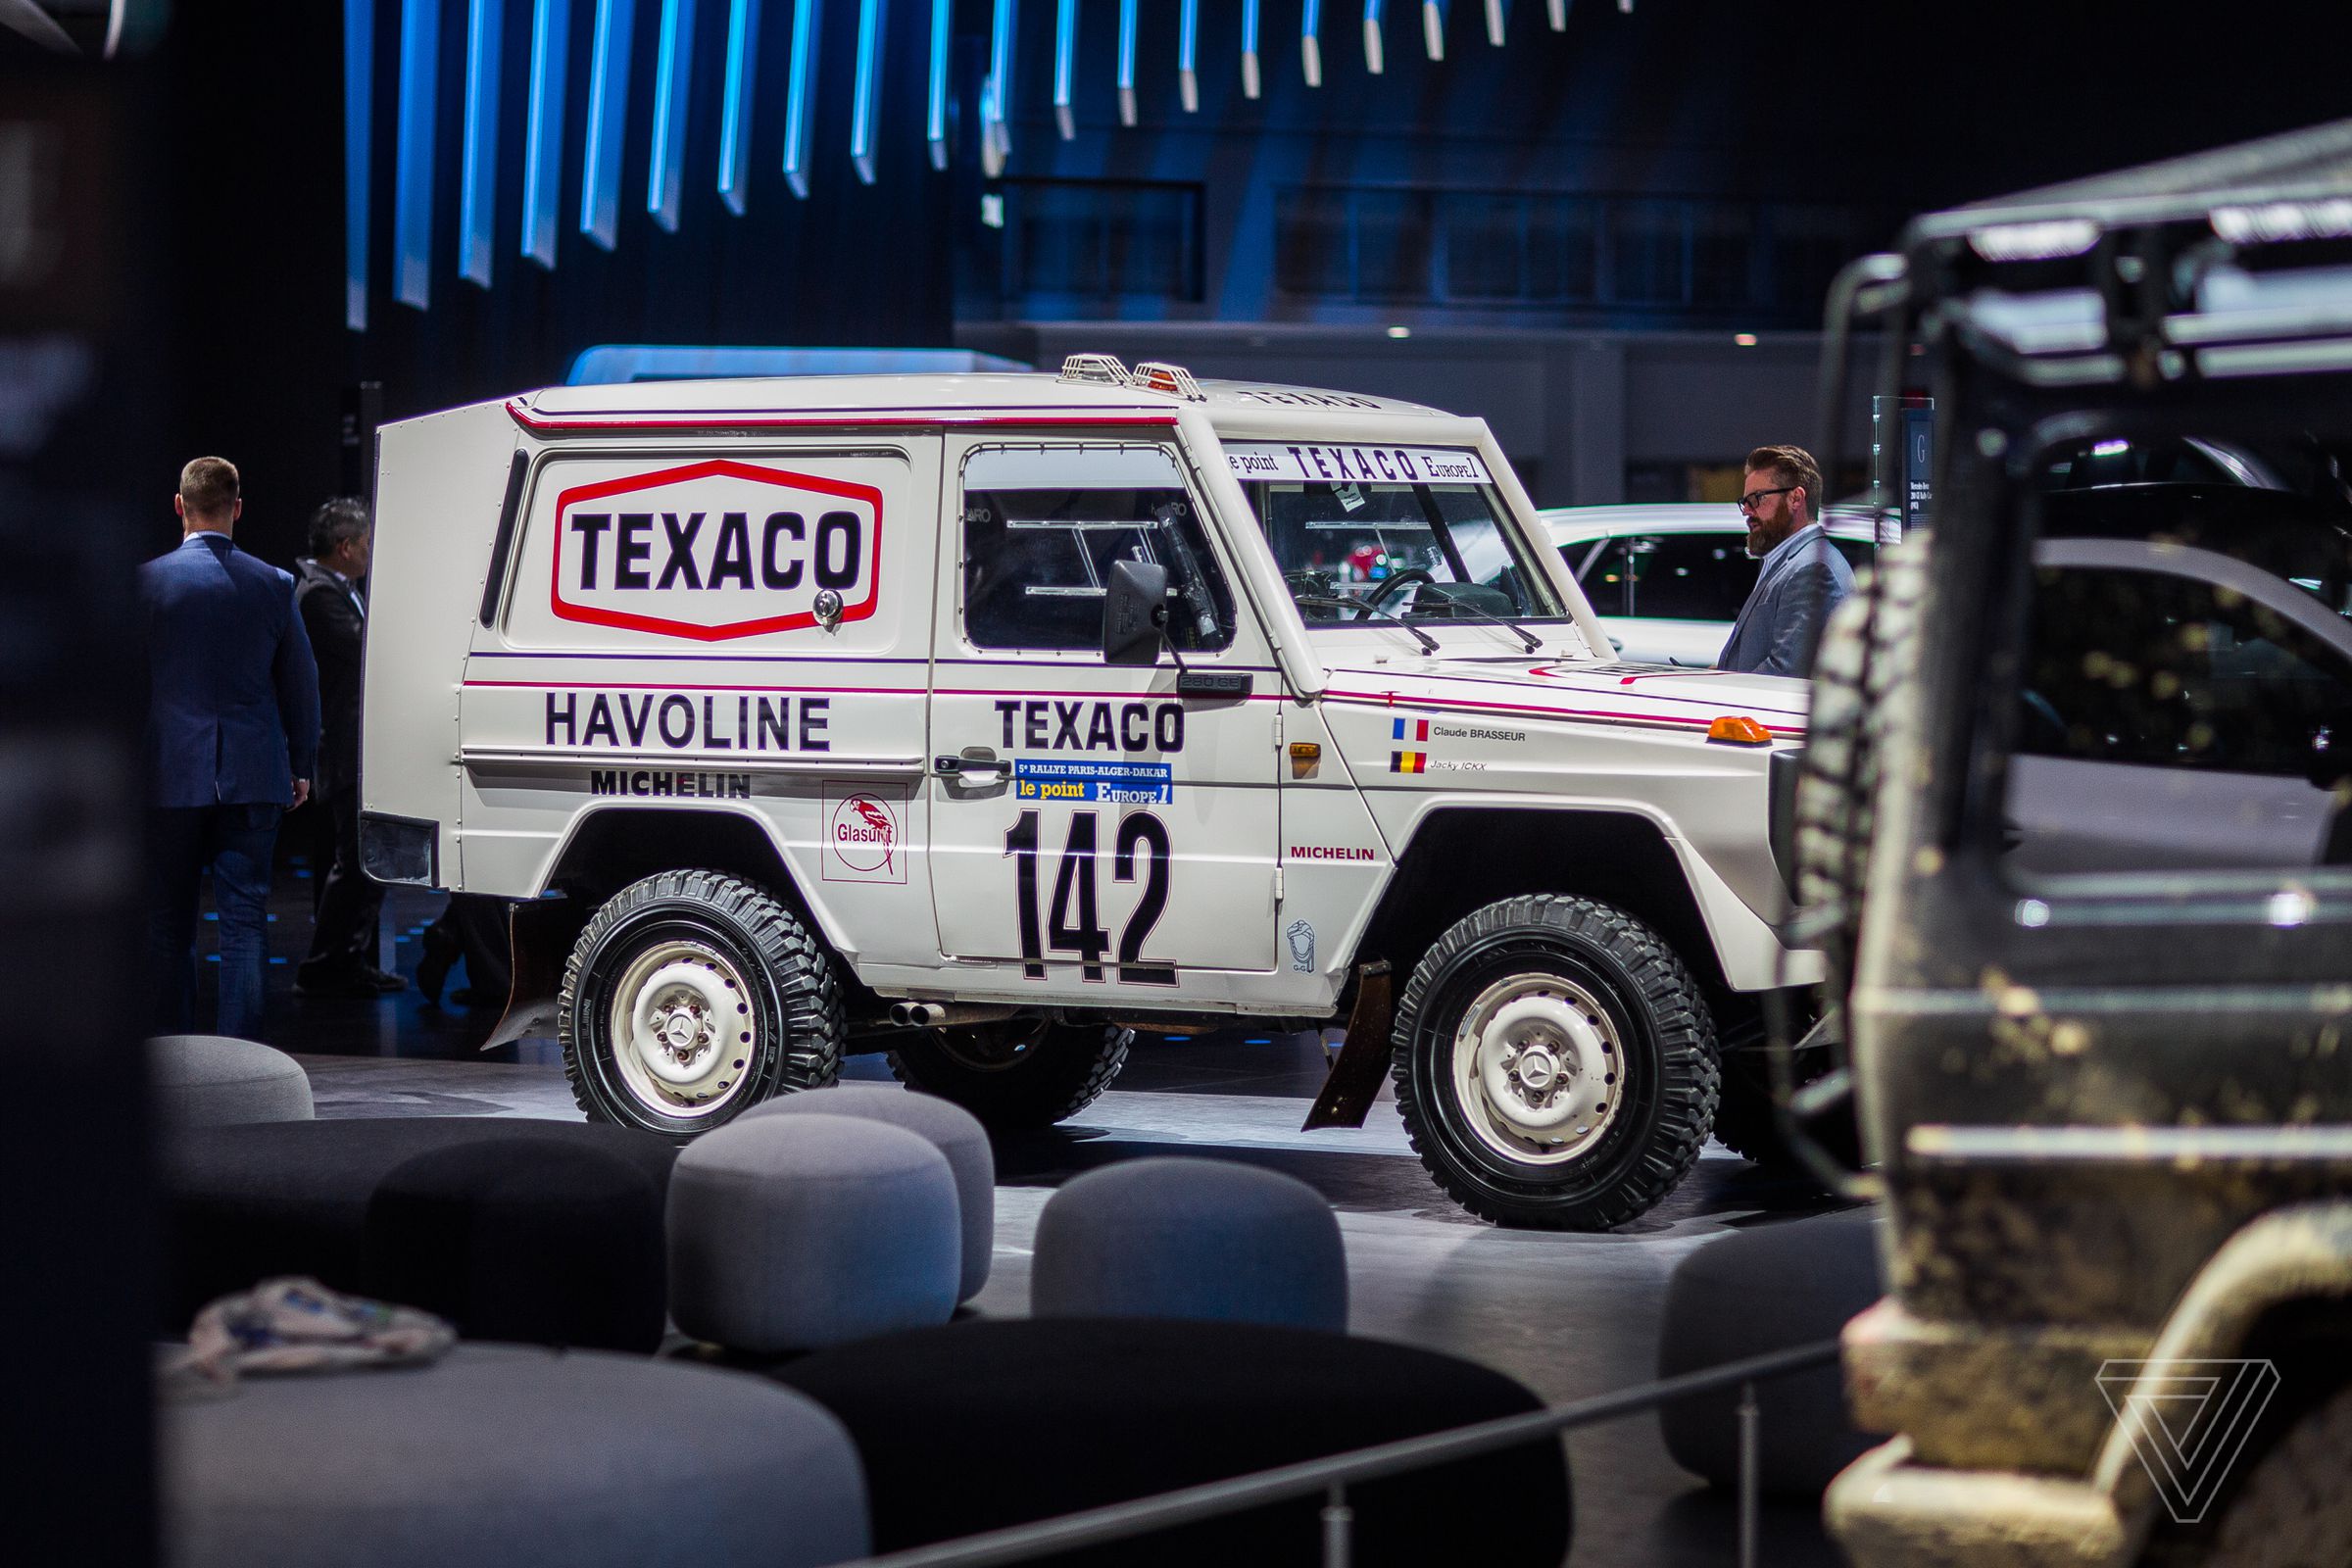 Mercedes-Benz probably hopes the new G Wagen takes on as many different lives as past versions, like this 1983 Paris to Dakar rally winner.